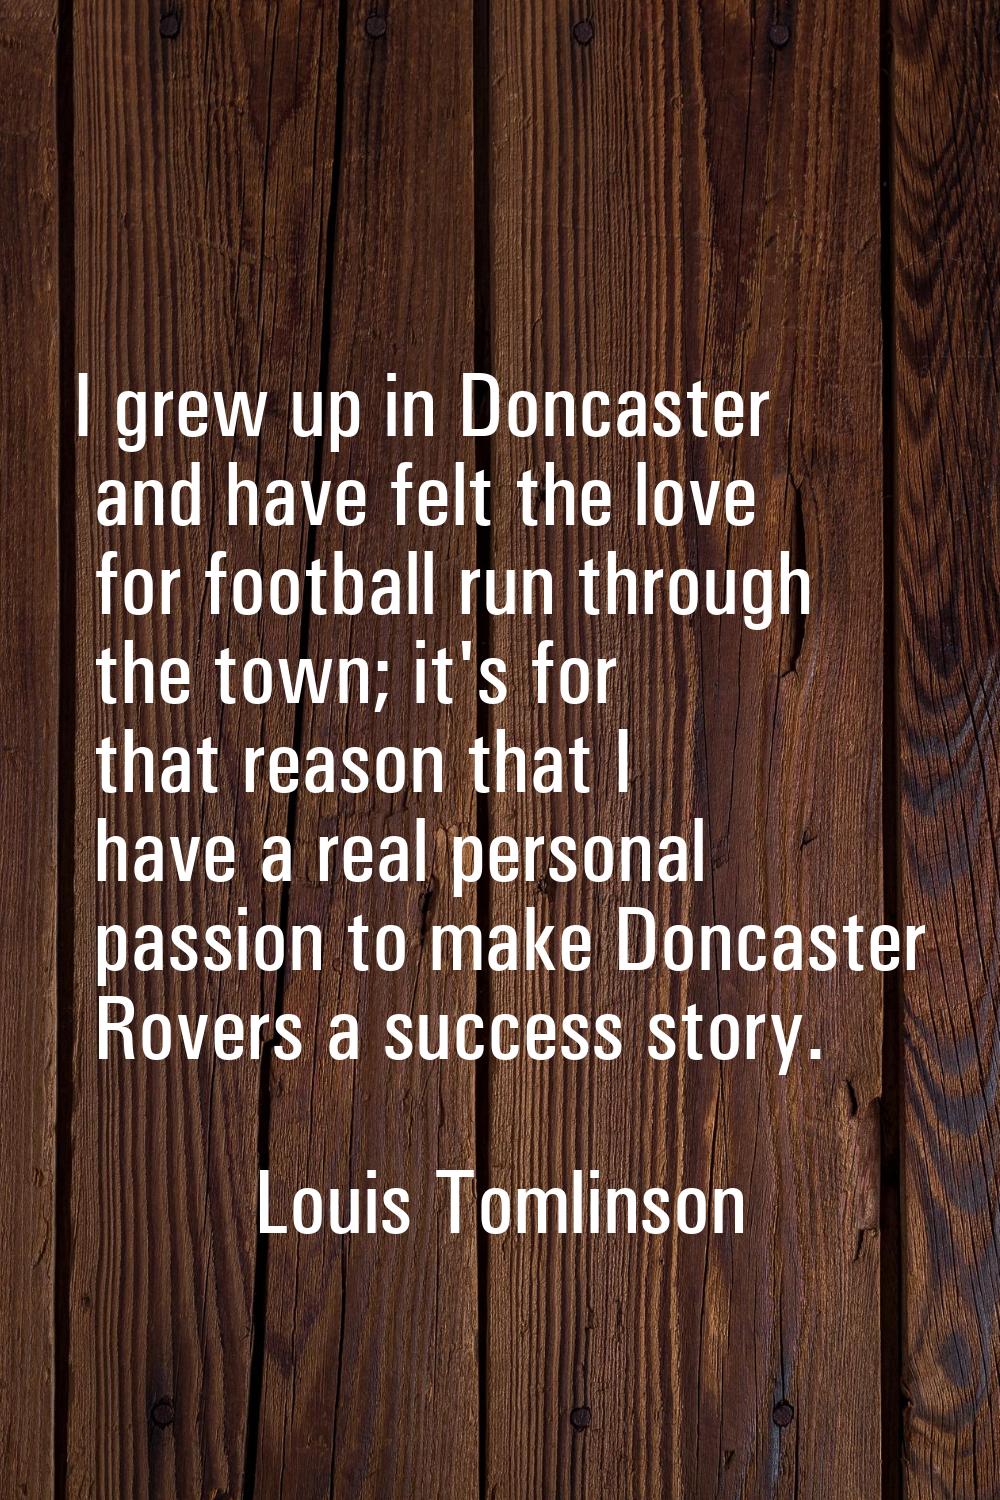 I grew up in Doncaster and have felt the love for football run through the town; it's for that reas